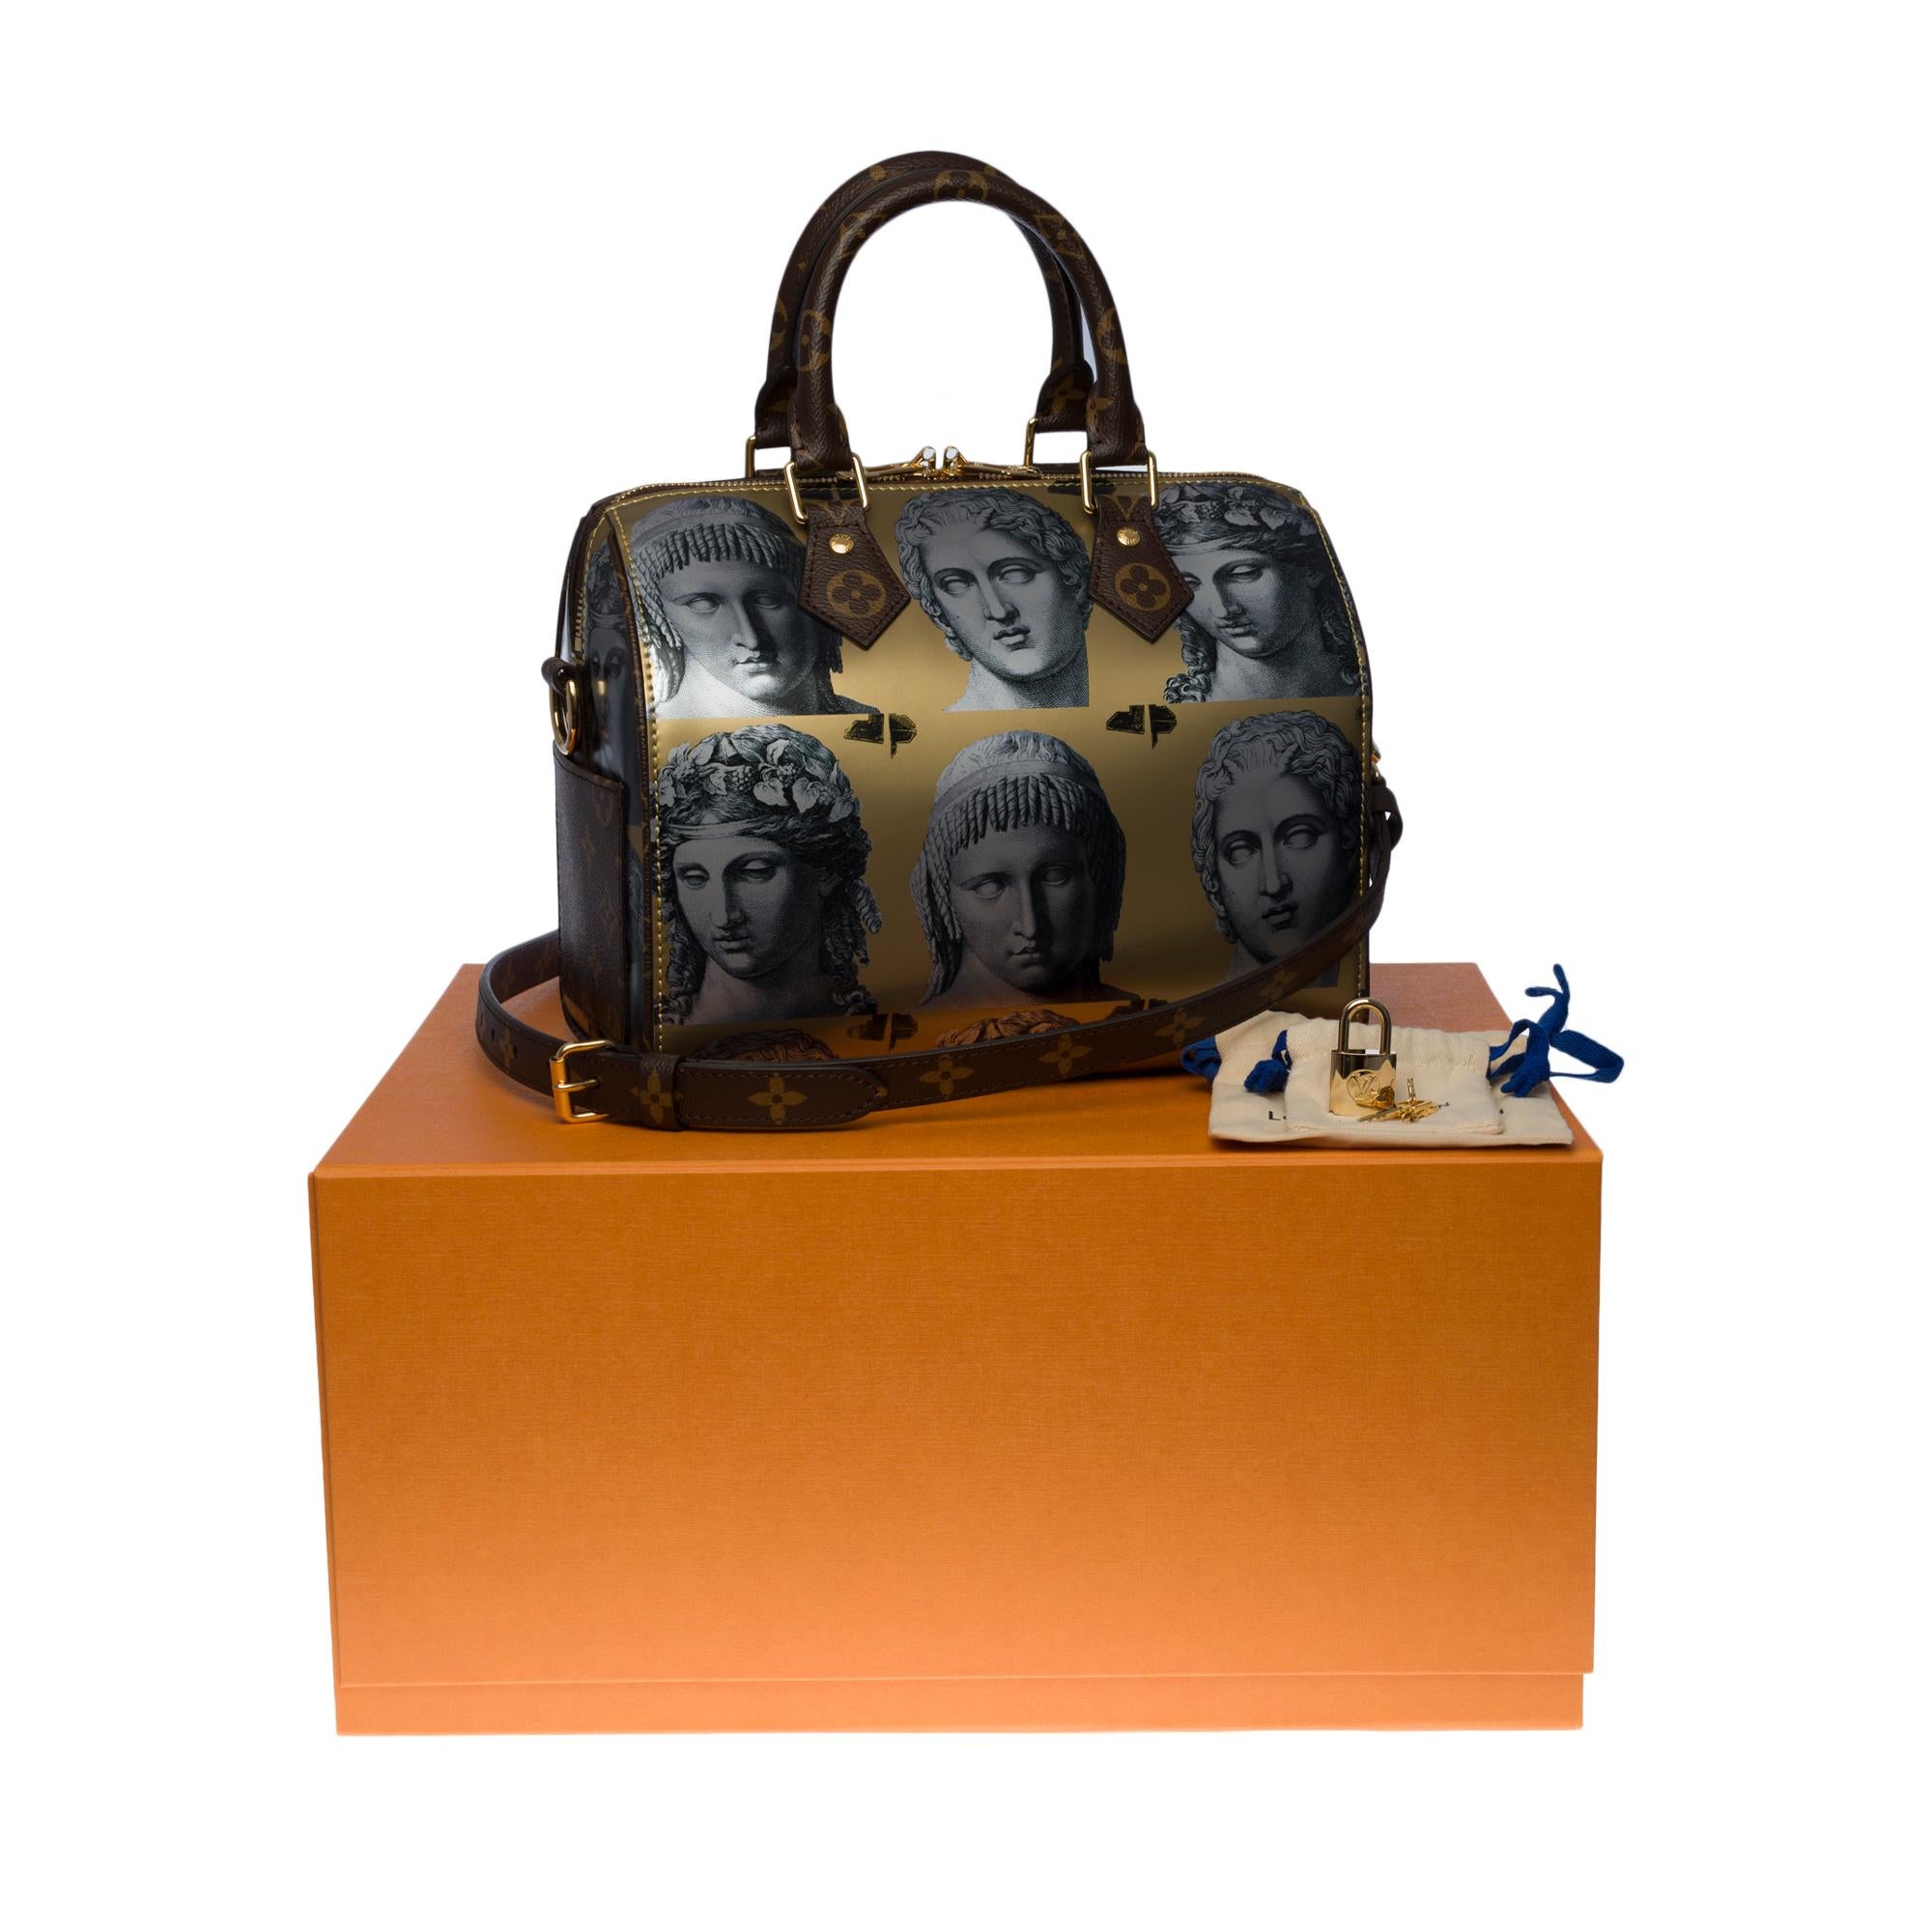 BRAND NEW-Limited edition Louis Vuitton Speedy 25 strap Fornasetti  fw21 7